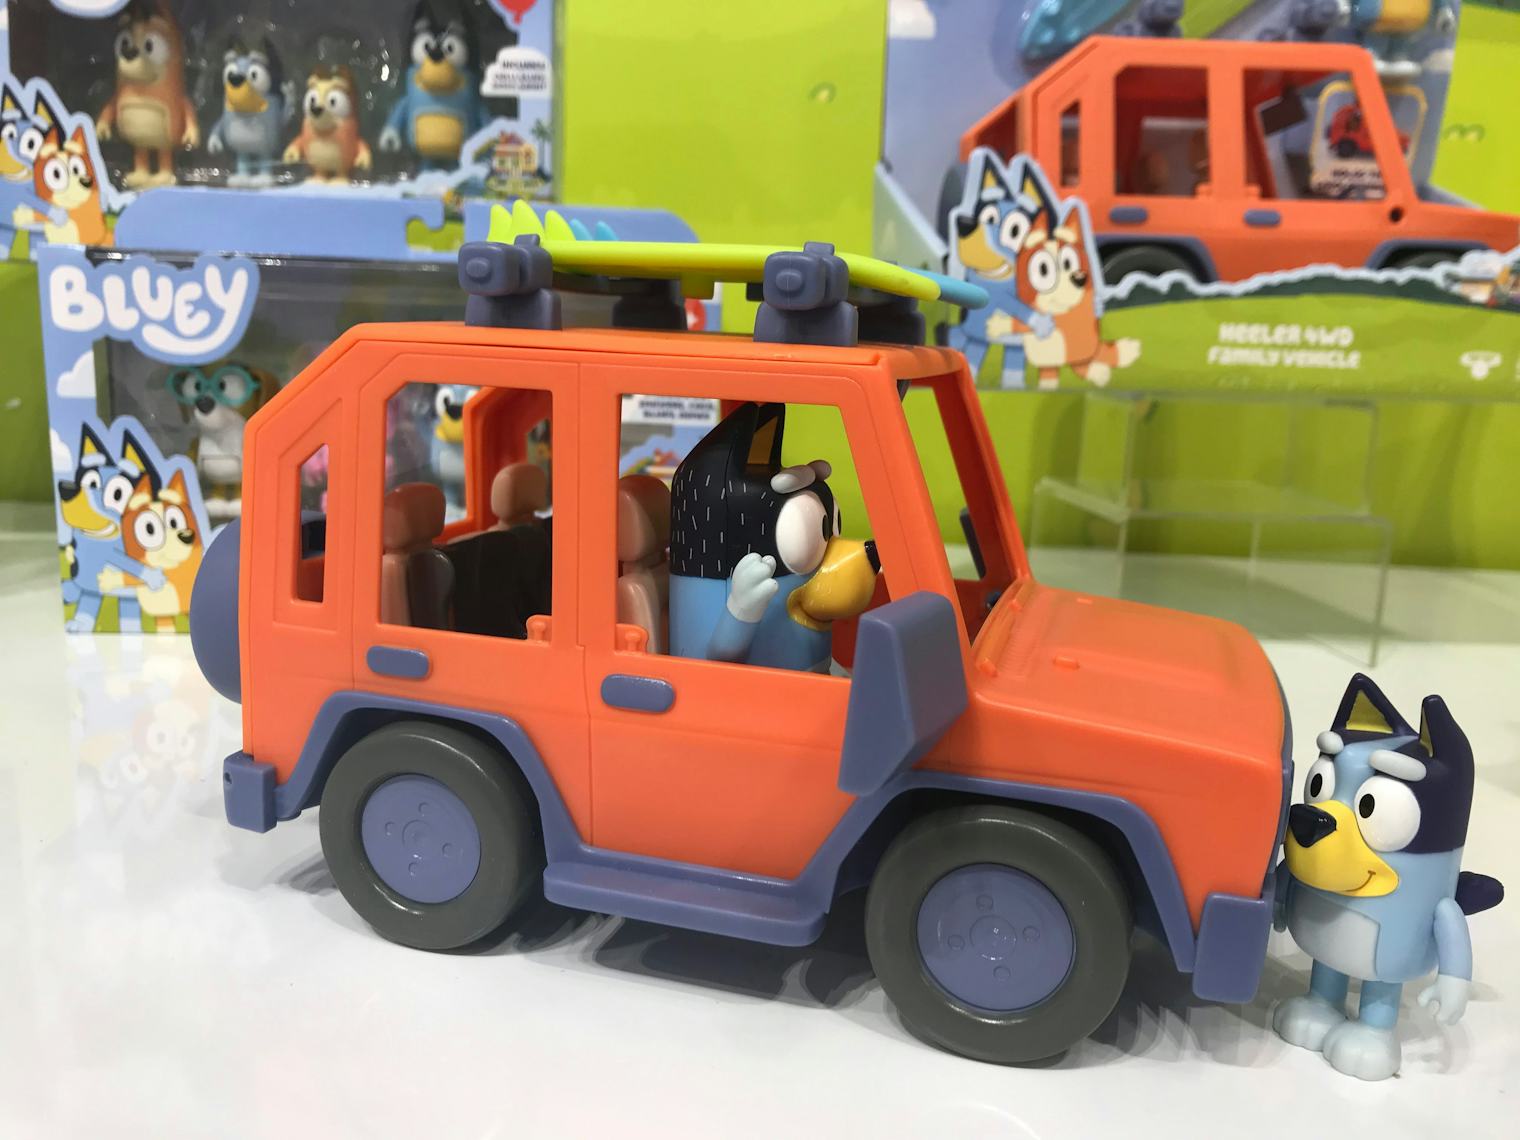 New 'Bluey' Toys Are Coming & The Playhouse Set Is Too Cute For Words